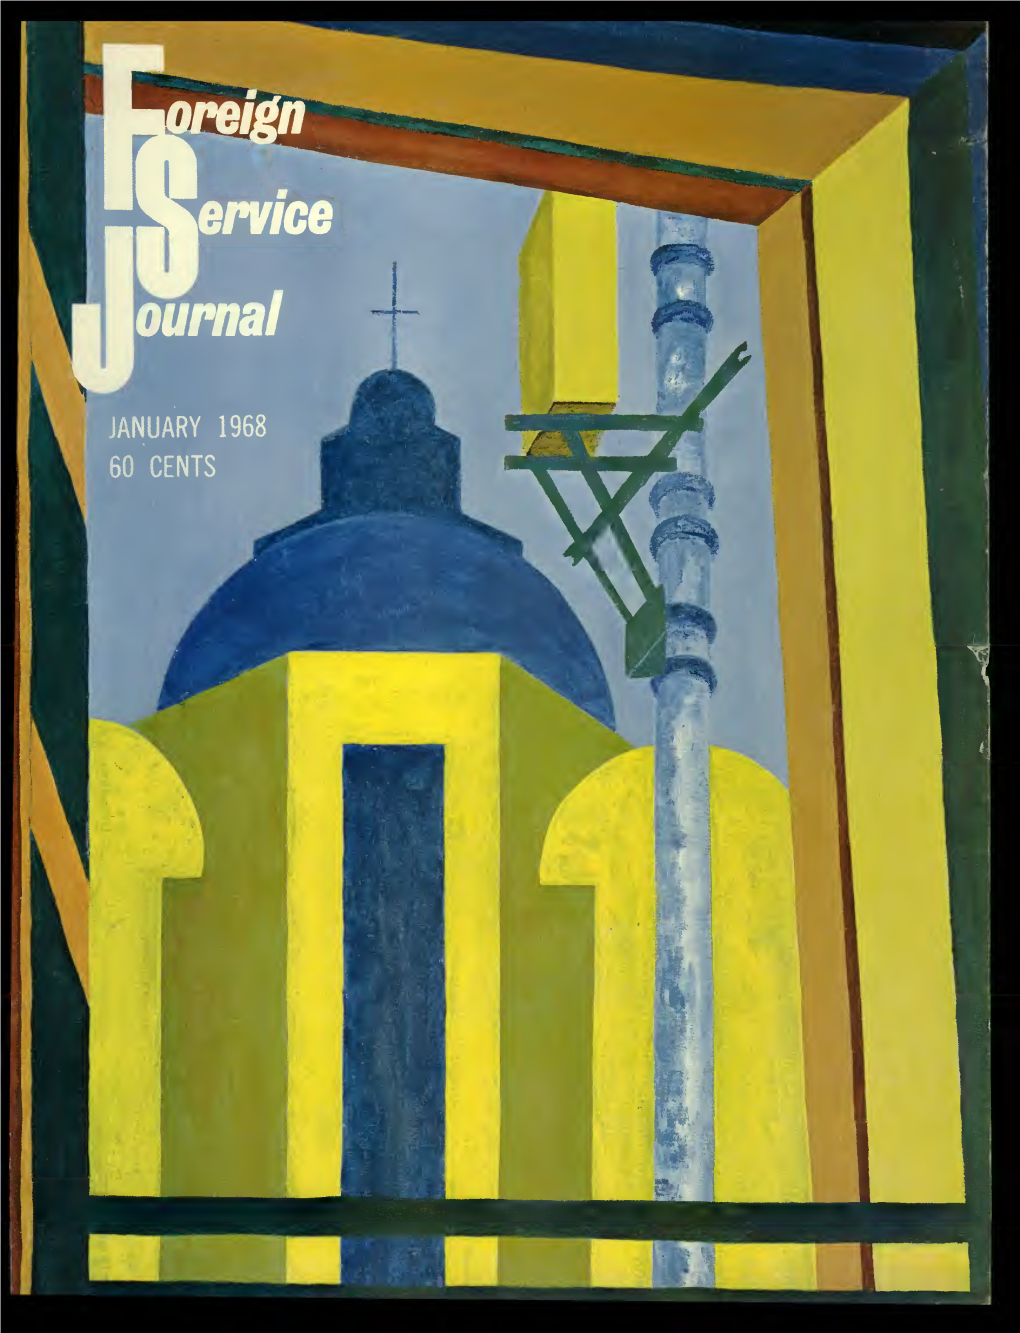 The Foreign Service Journal, January 1968